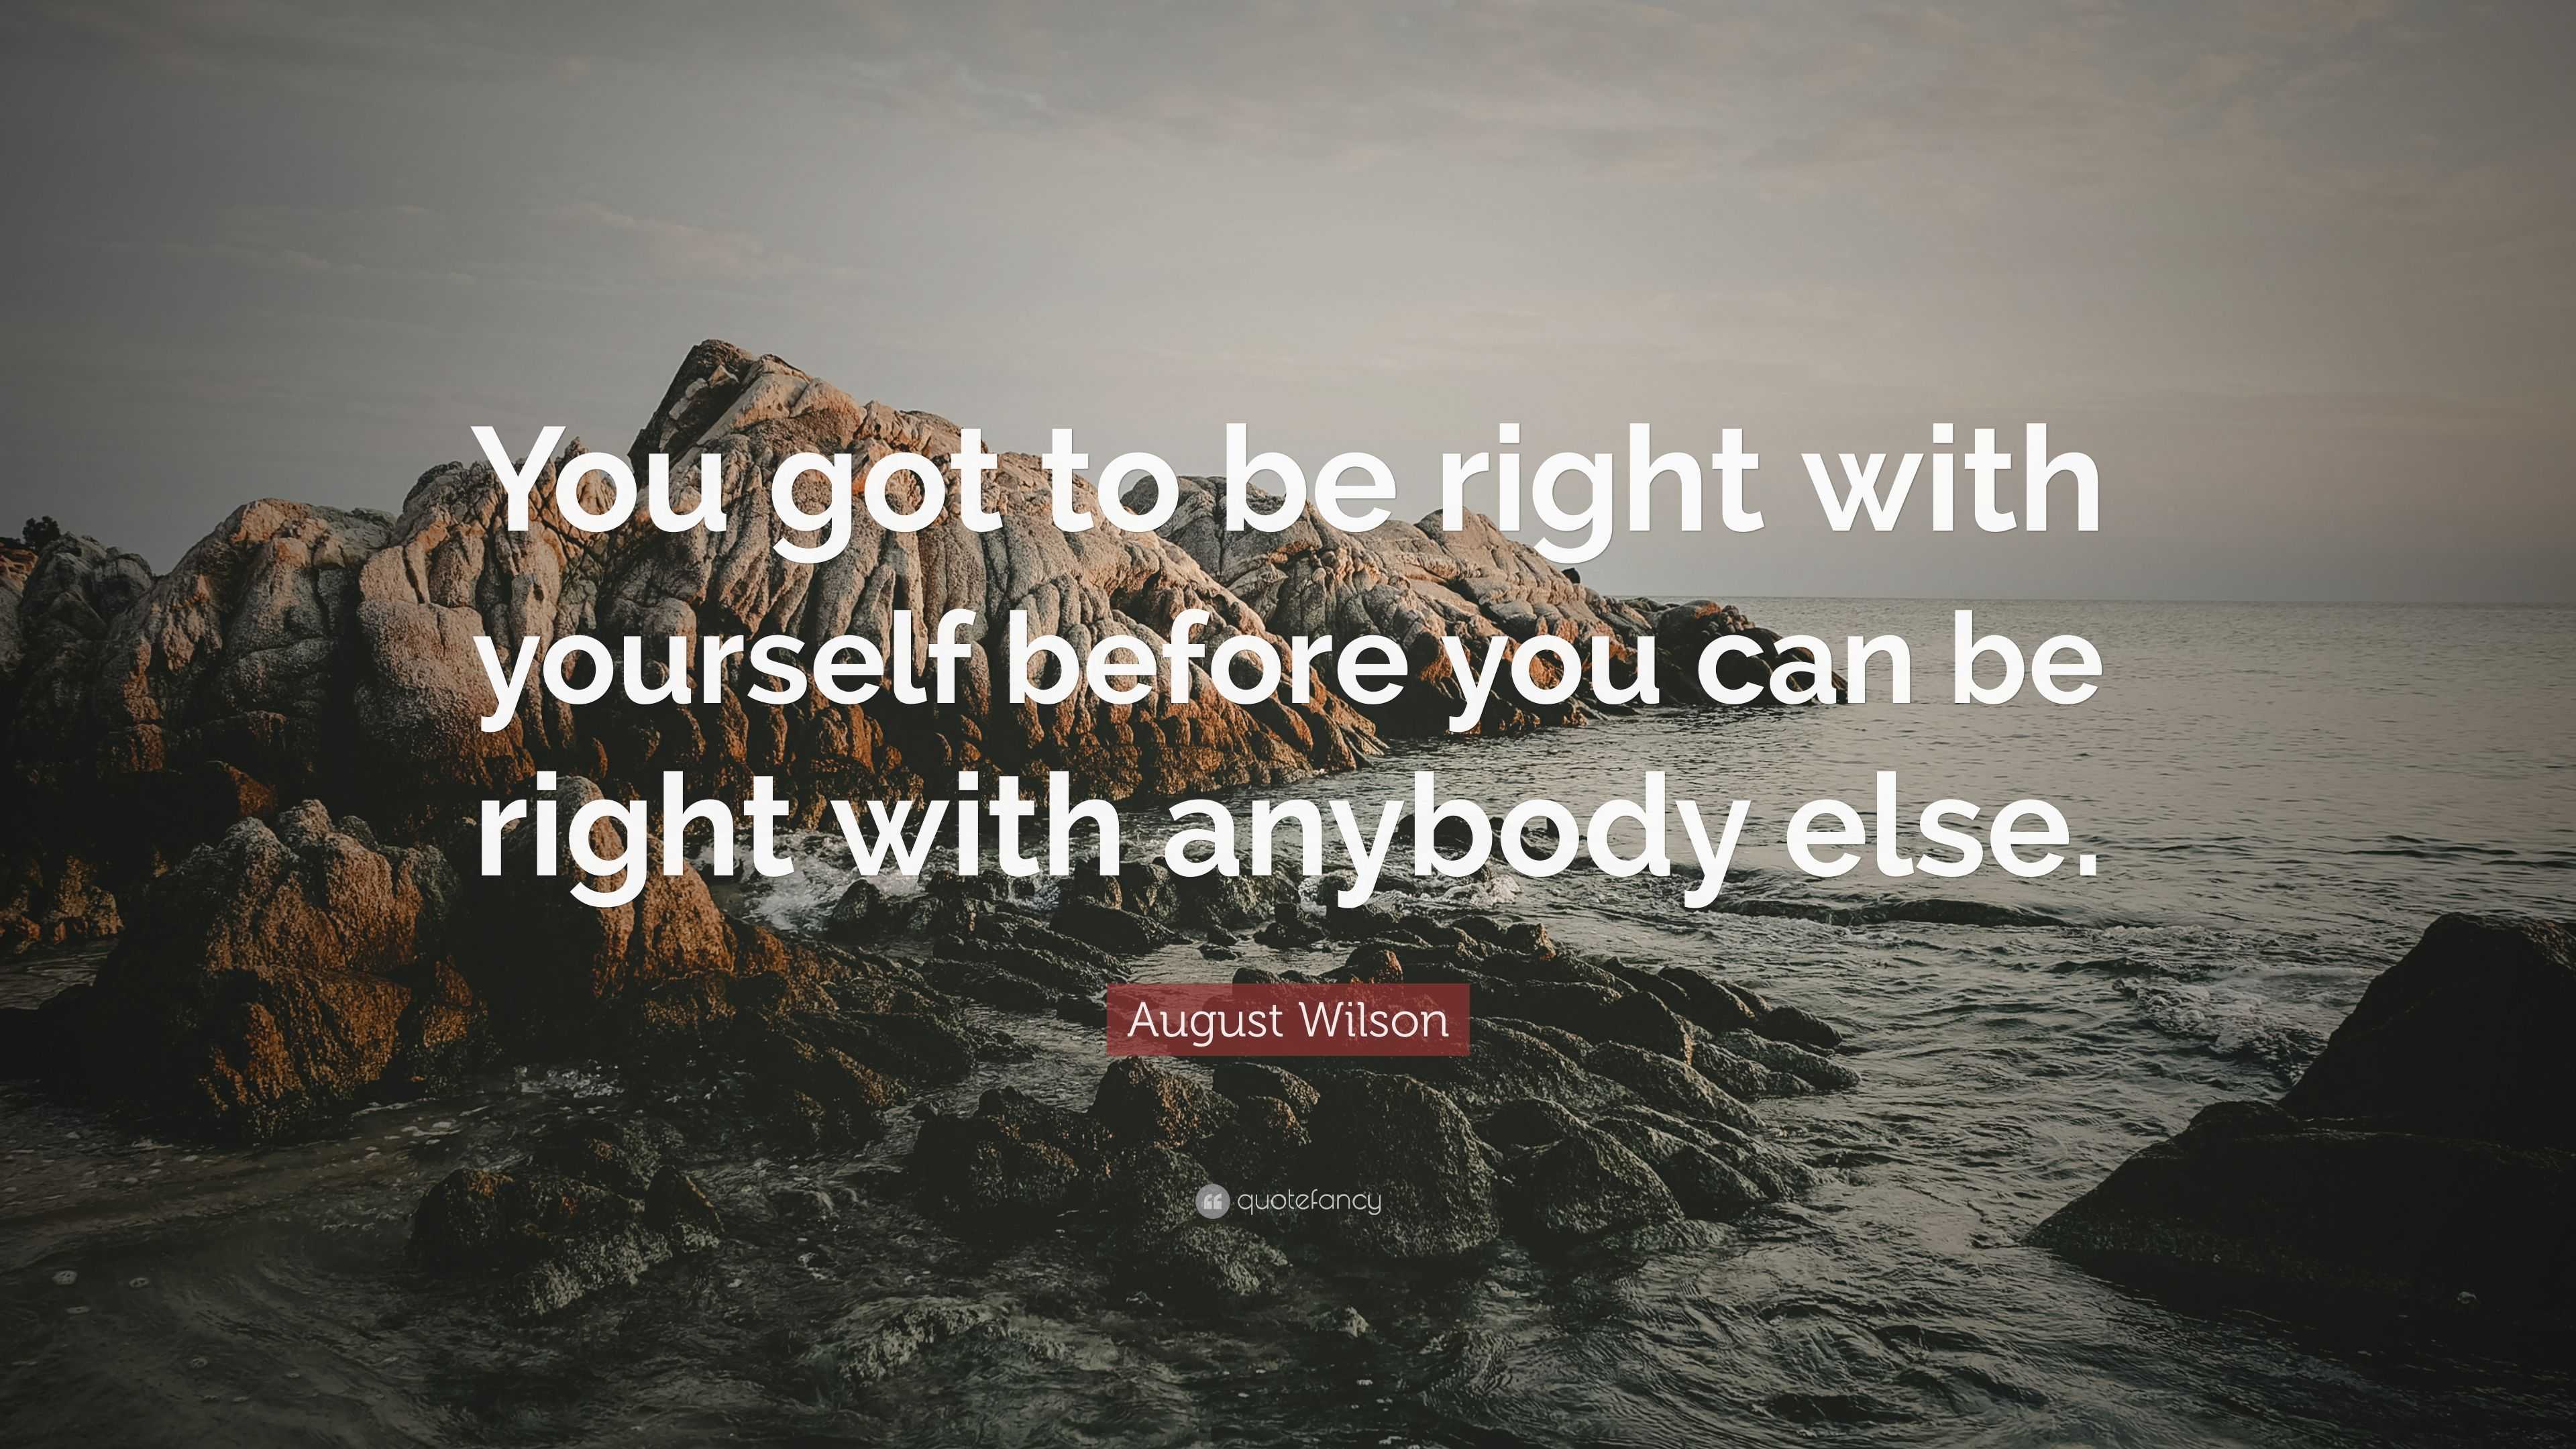 August Wilson Quote: “You got to be right with yourself before you can ...